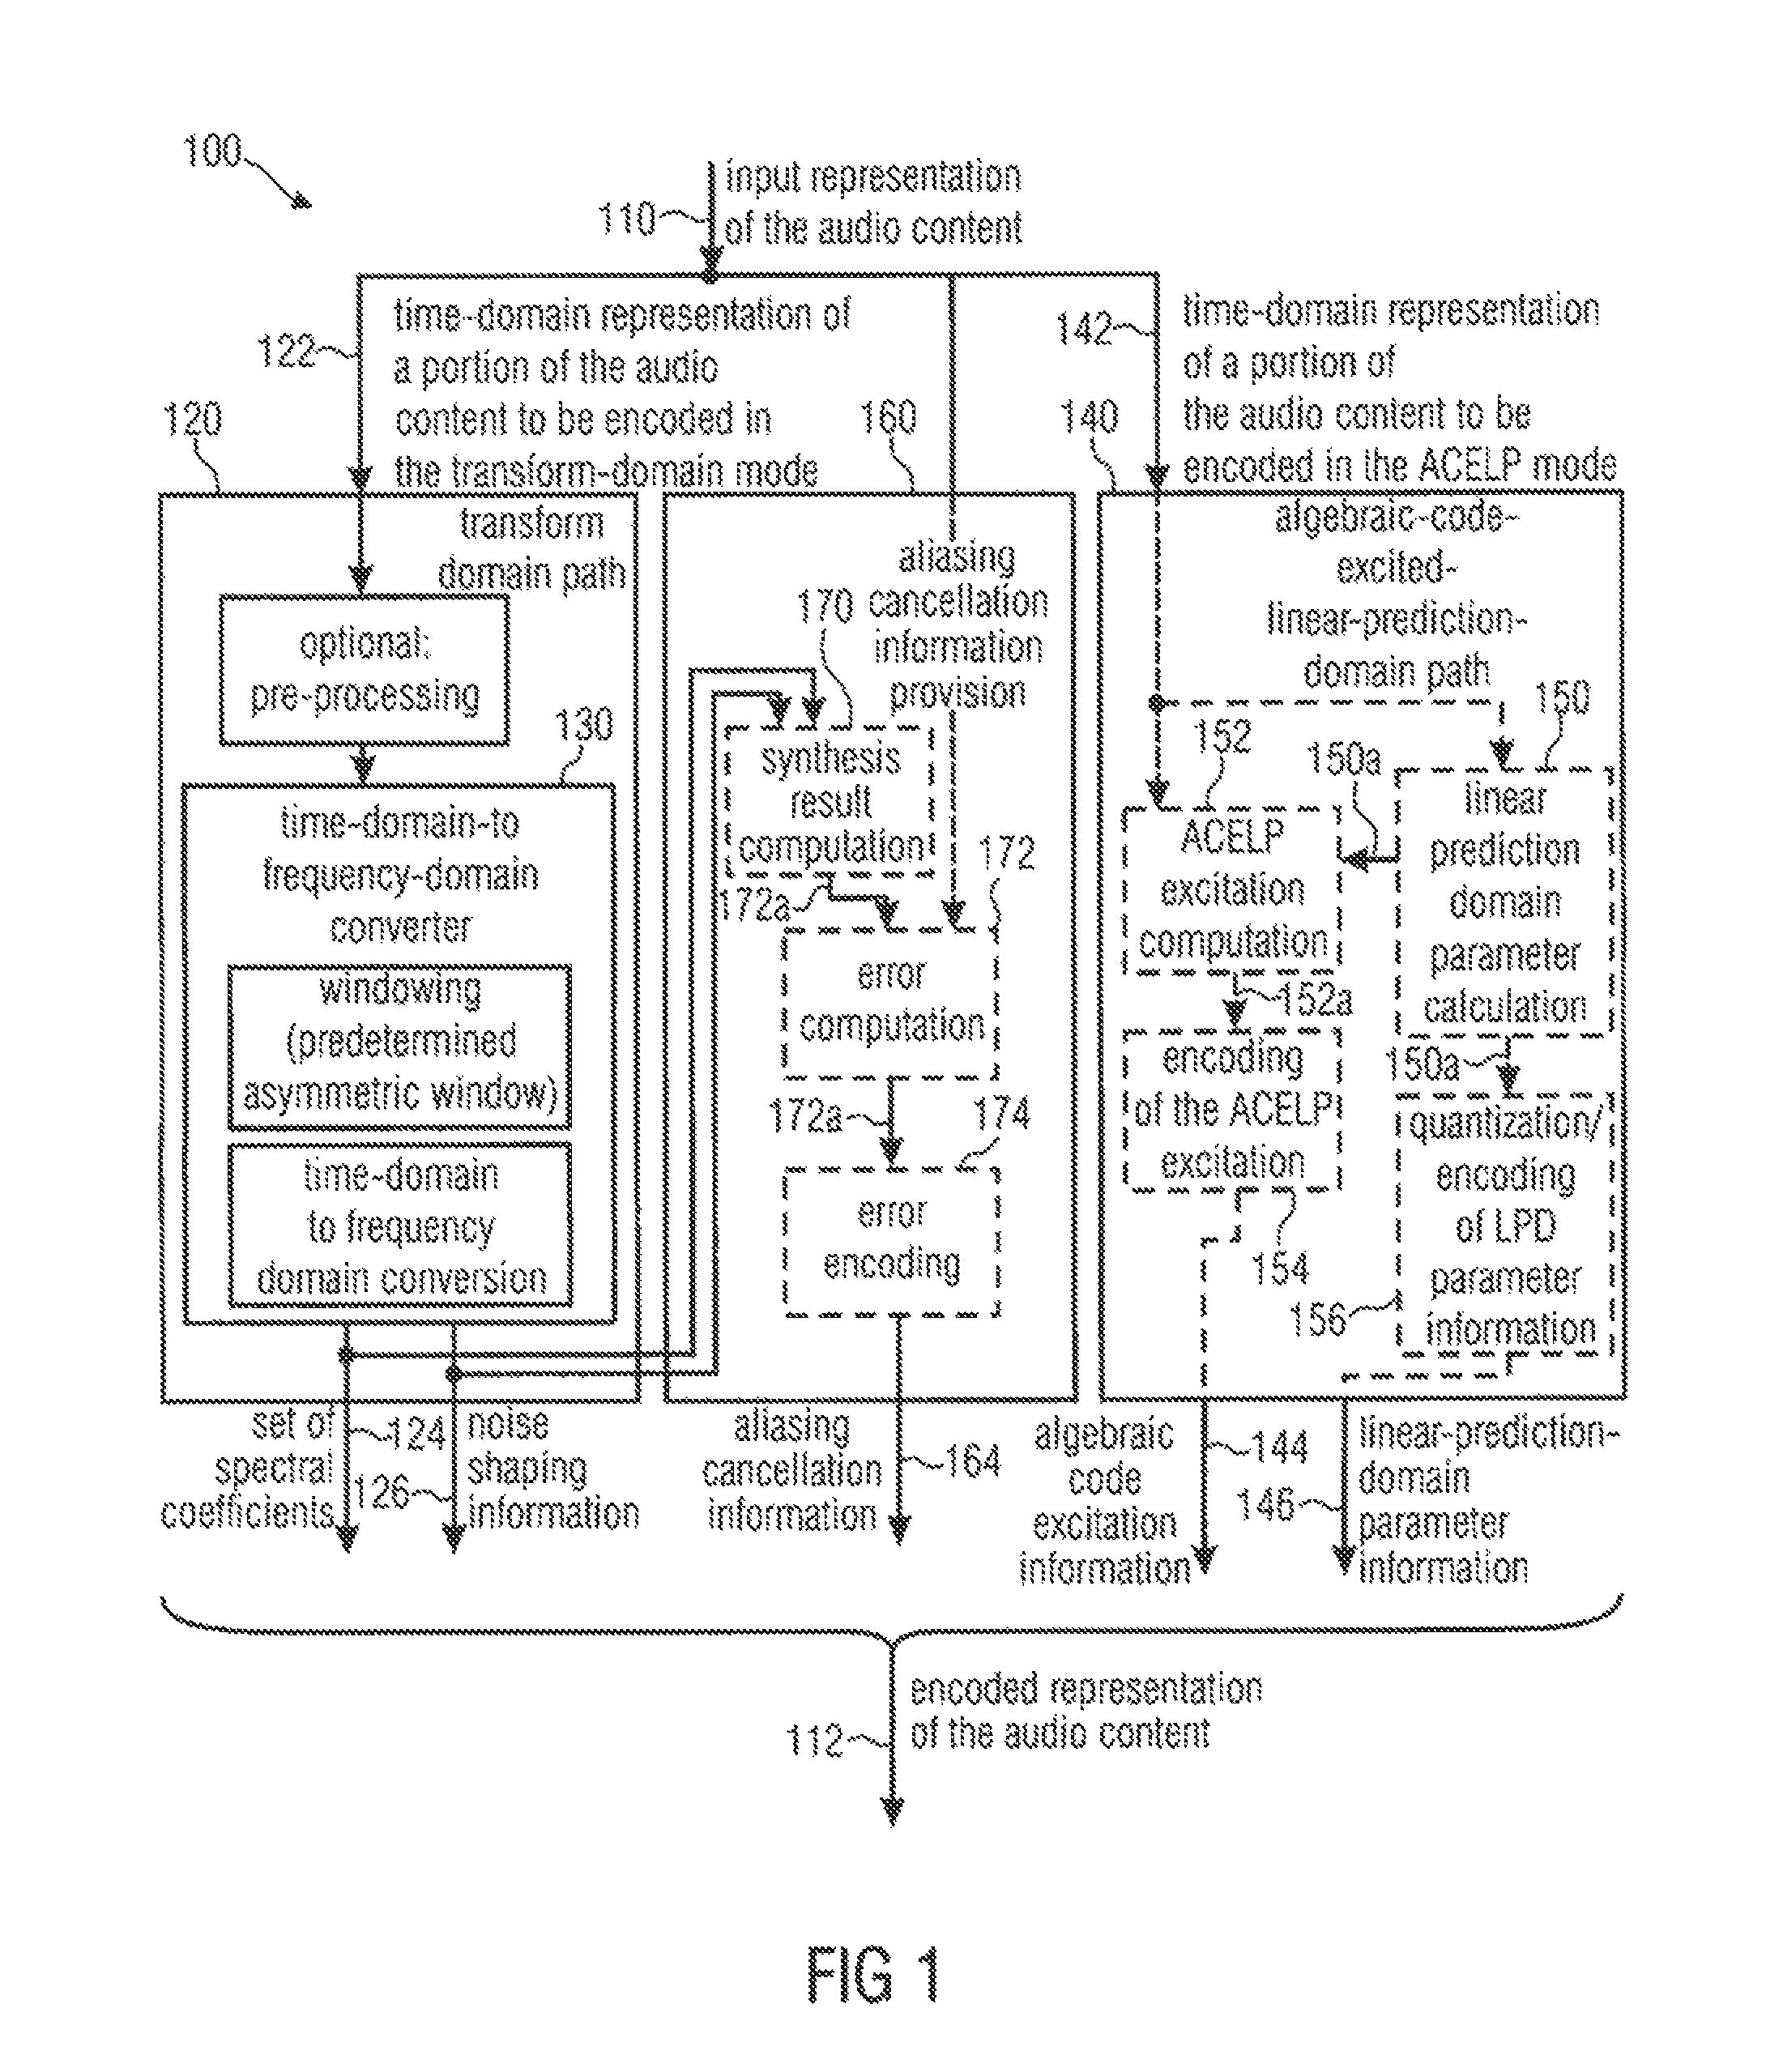 Audio signal encoder/decoder for use in low delay applications, selectively providing aliasing cancellation information while selectively switching between transform coding and celp coding of frames